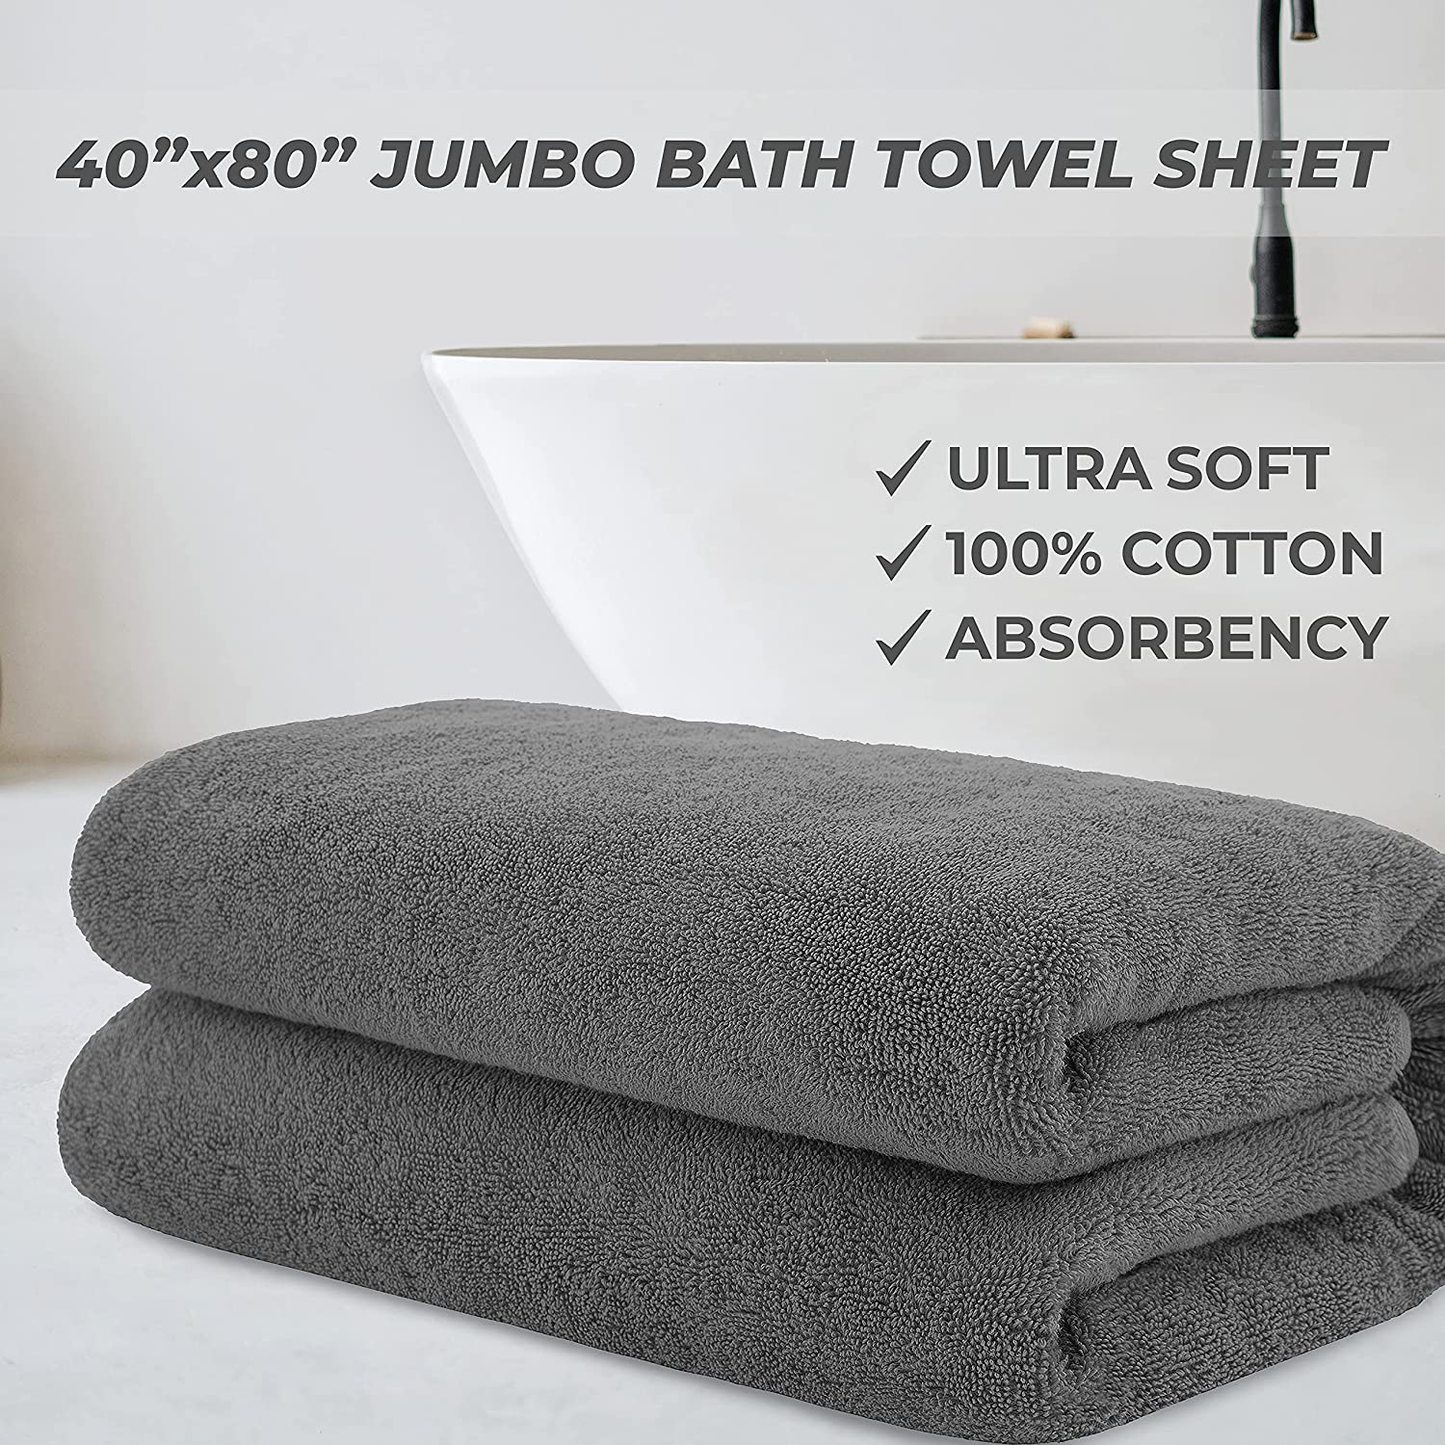 Cotton Paradise Luxurious Jumbo Bath Sheet 40x80 Inches Thick & Large 650 GSM Genuine Ringspun Cotton, Luxury Hotel & Spa Quality